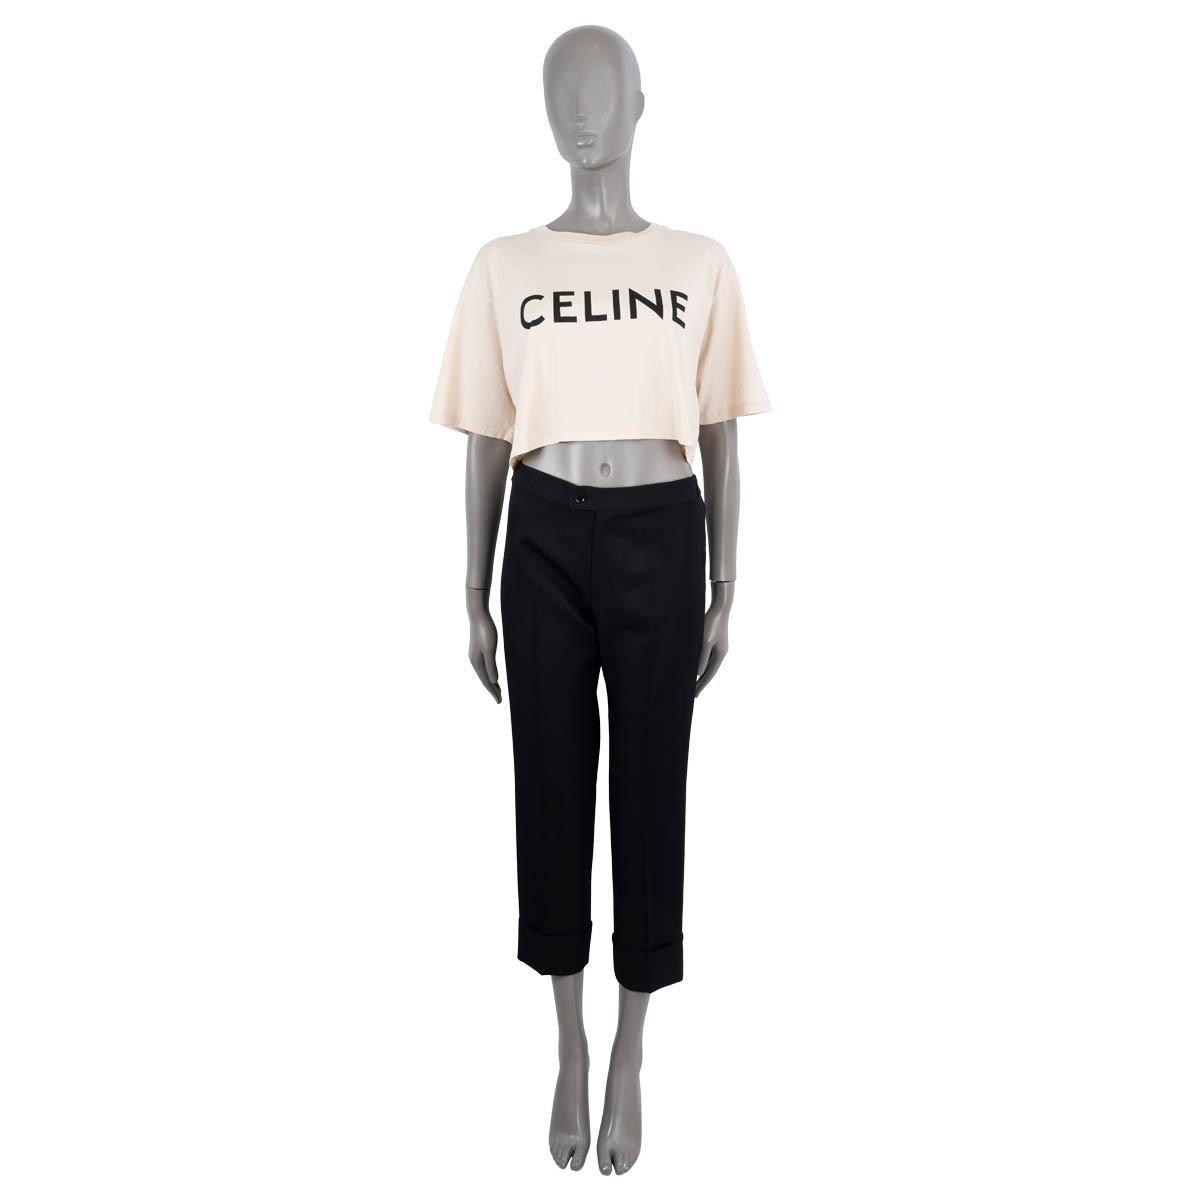 100% authentic Celine cropped logo jersey t-shirt in nude cotton (100%). Brand new with tags. 

Measurements
Tag Size	S
Size	S
Shoulder Width	48cm (18.7in)
Bust From	104cm (40.6in)
Length	42cm (16.4in)
Side Seam Length	15cm (5.9in)
Sleeve